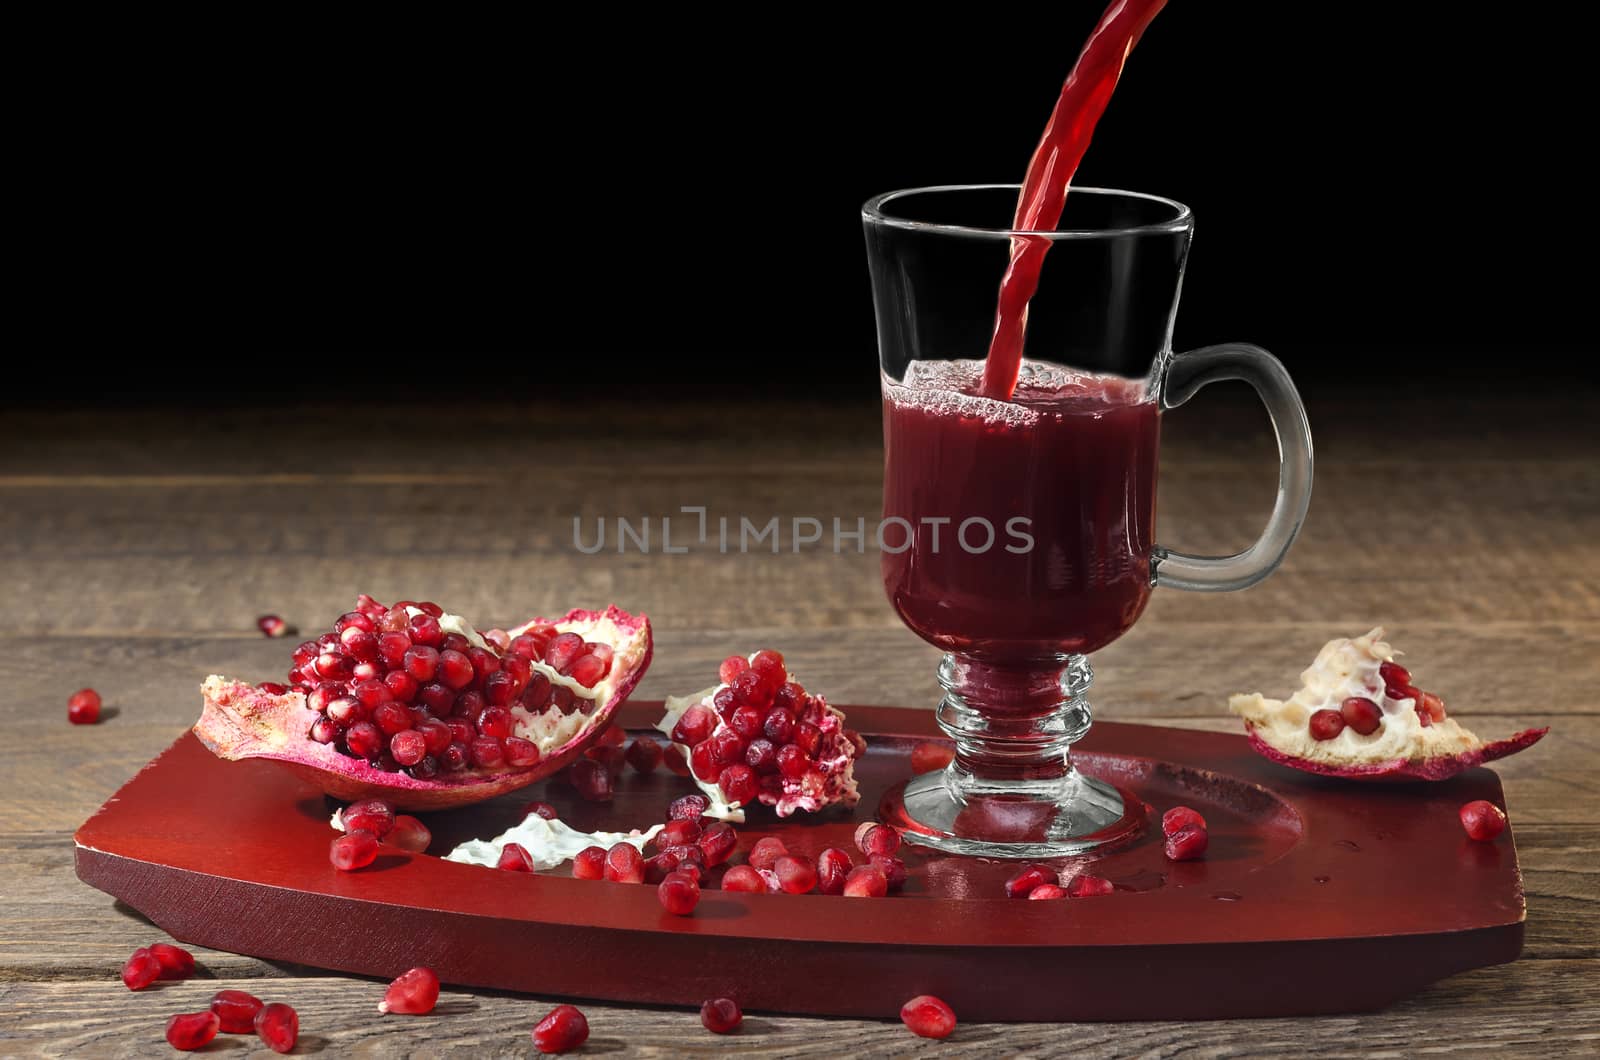 Pomegranate juice is poured into a glass Cup, wooden surface and black background. Selective focus. by Gaina